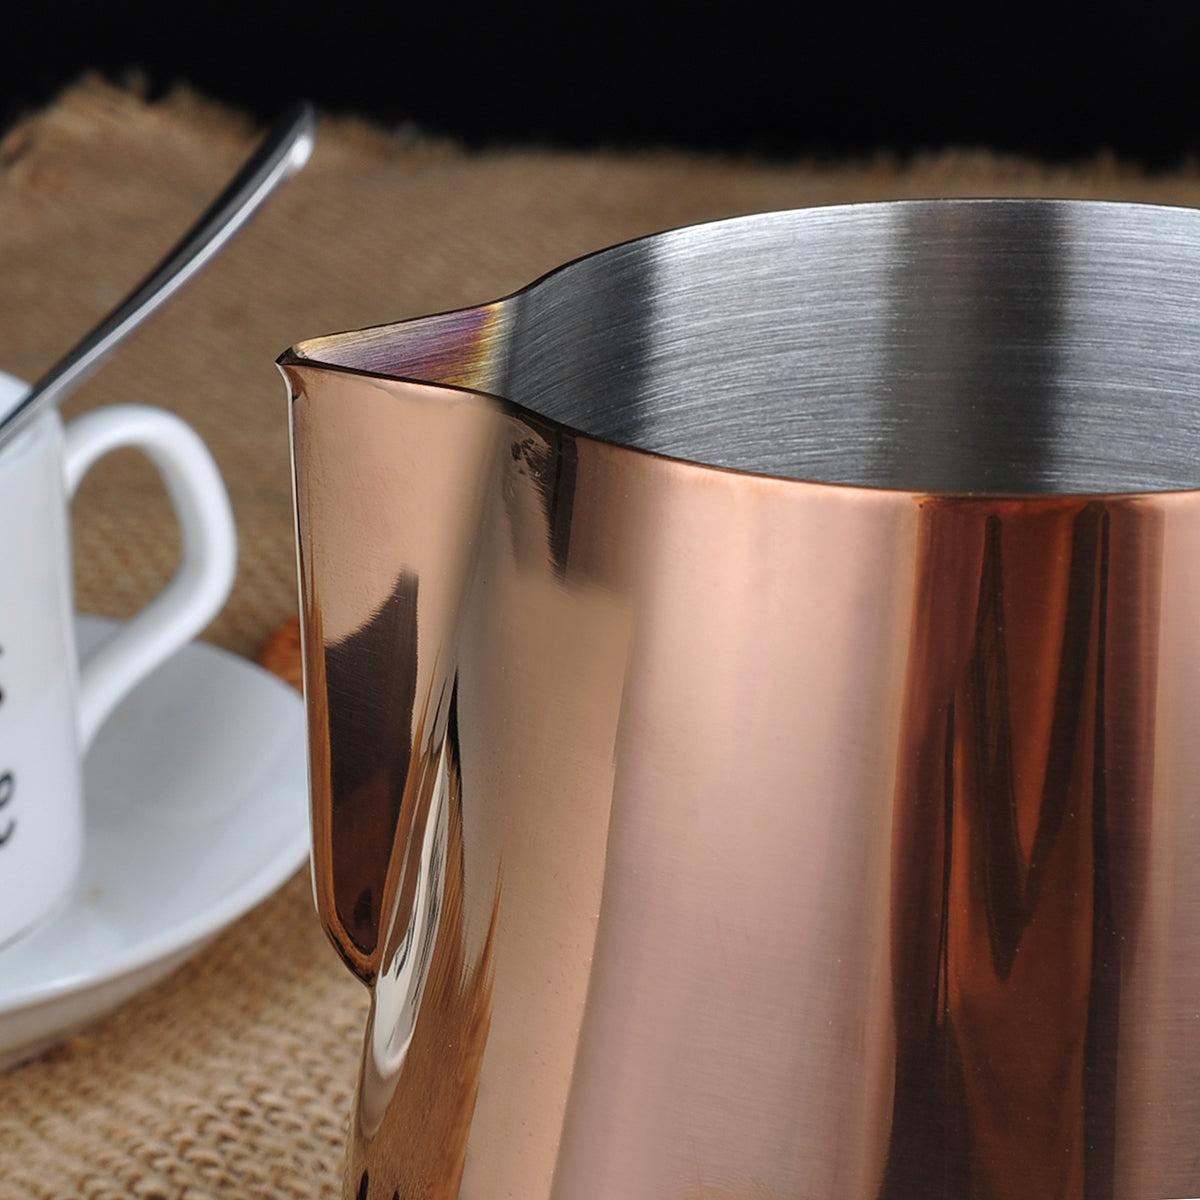 ReaNea Rose Gold Milk Frothing Pitcher 12 oz Stainless Steel Milk